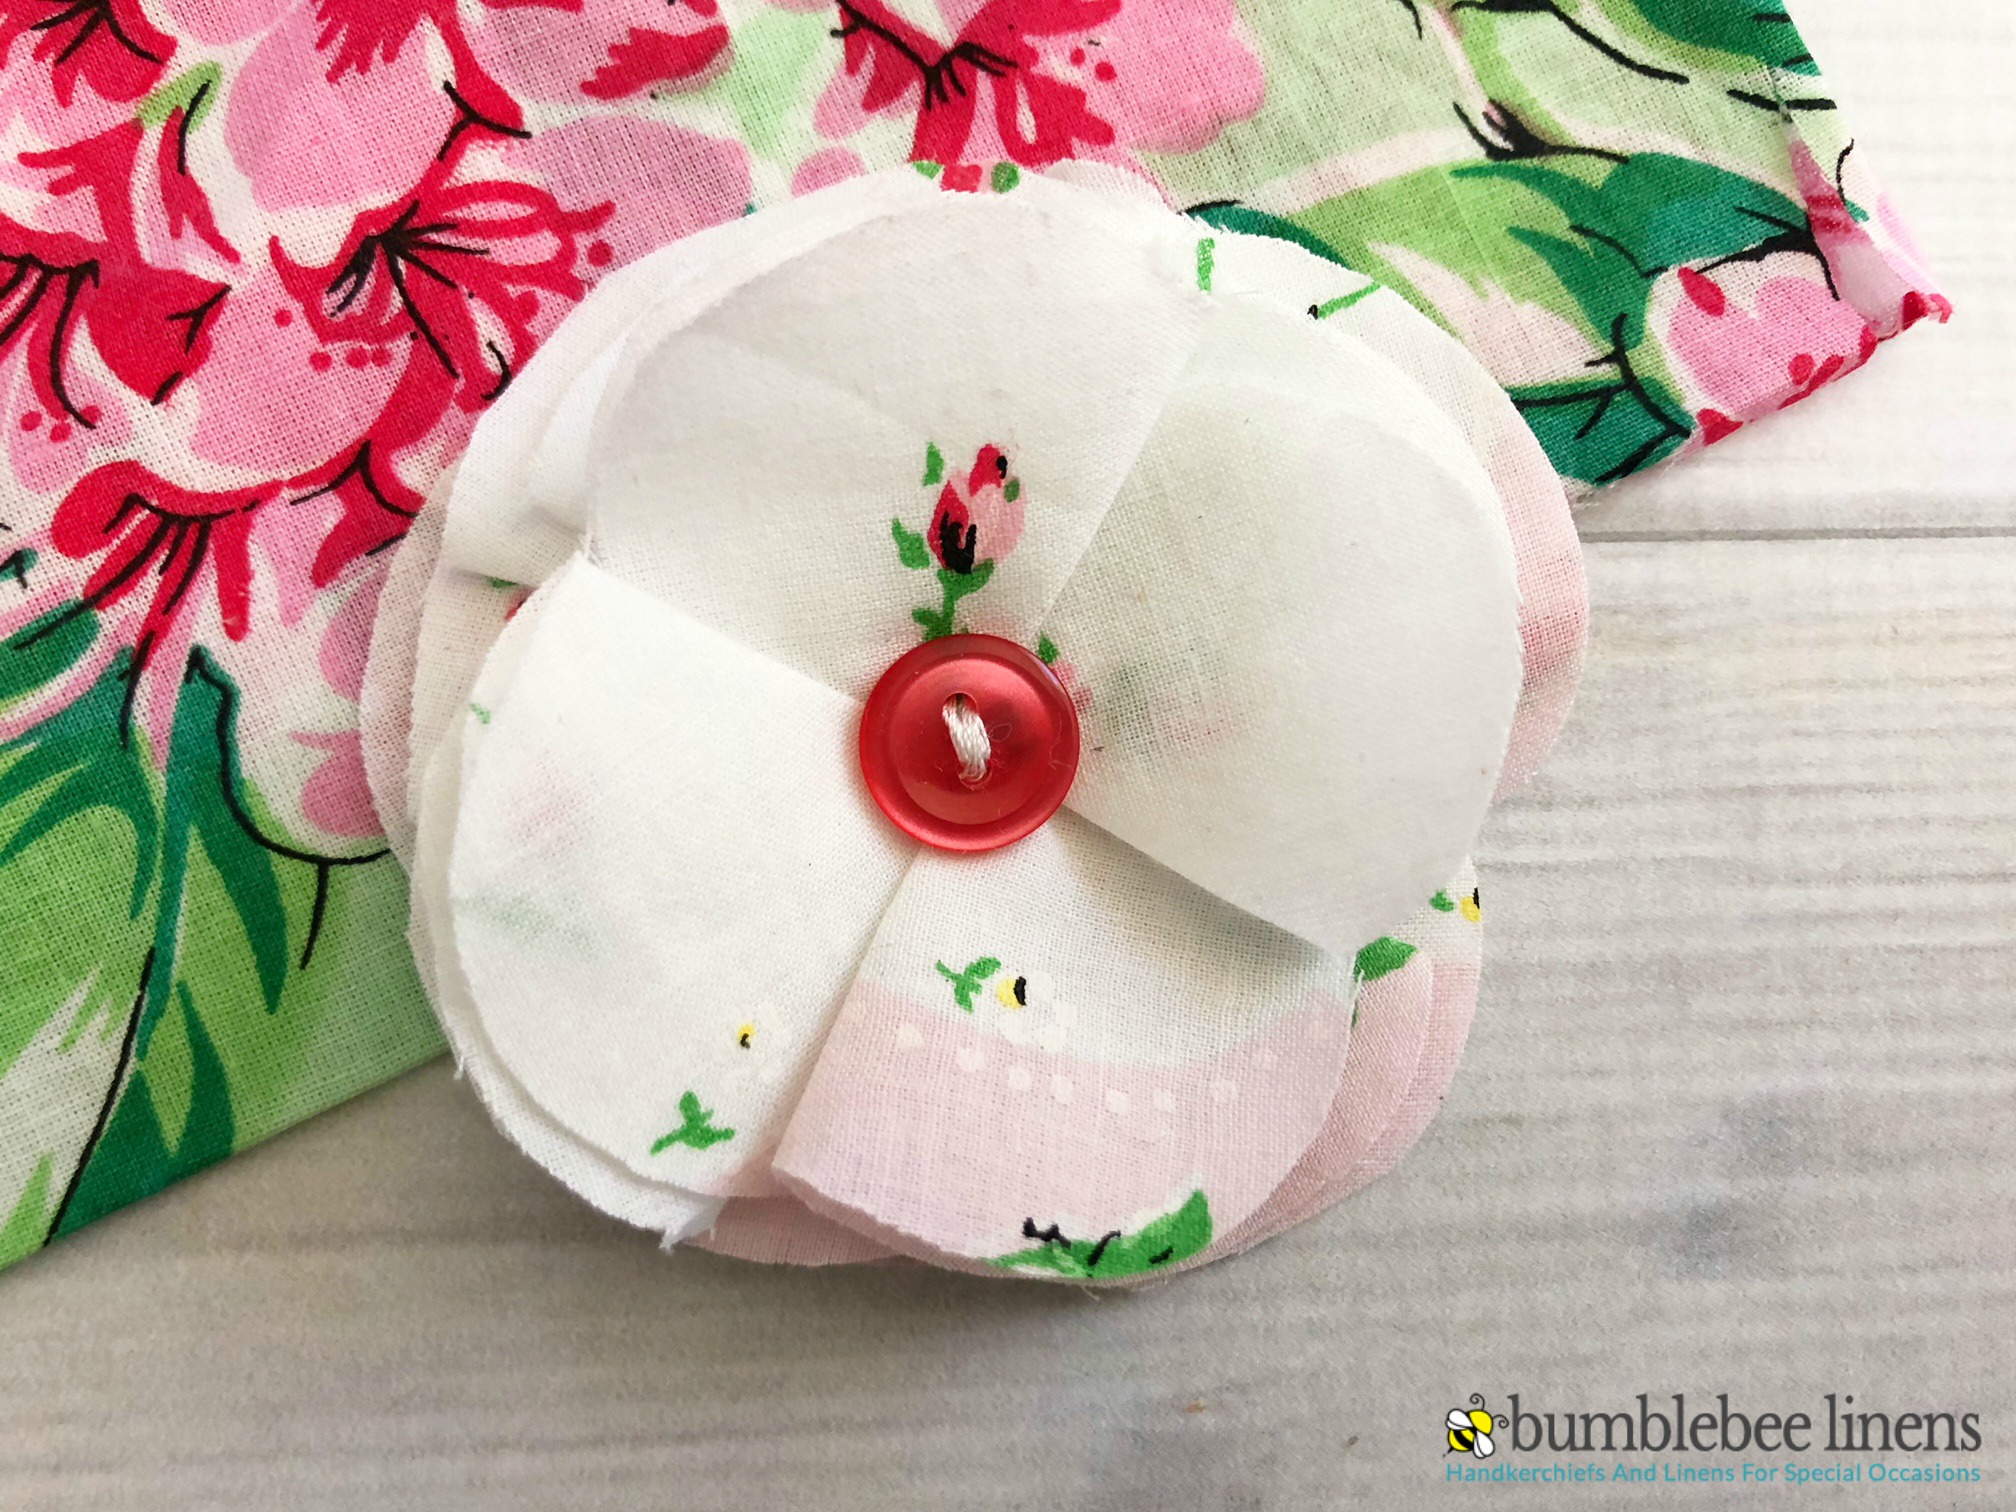 Learn How to Make a Handkerchief Hair Bow in a few simple steps.